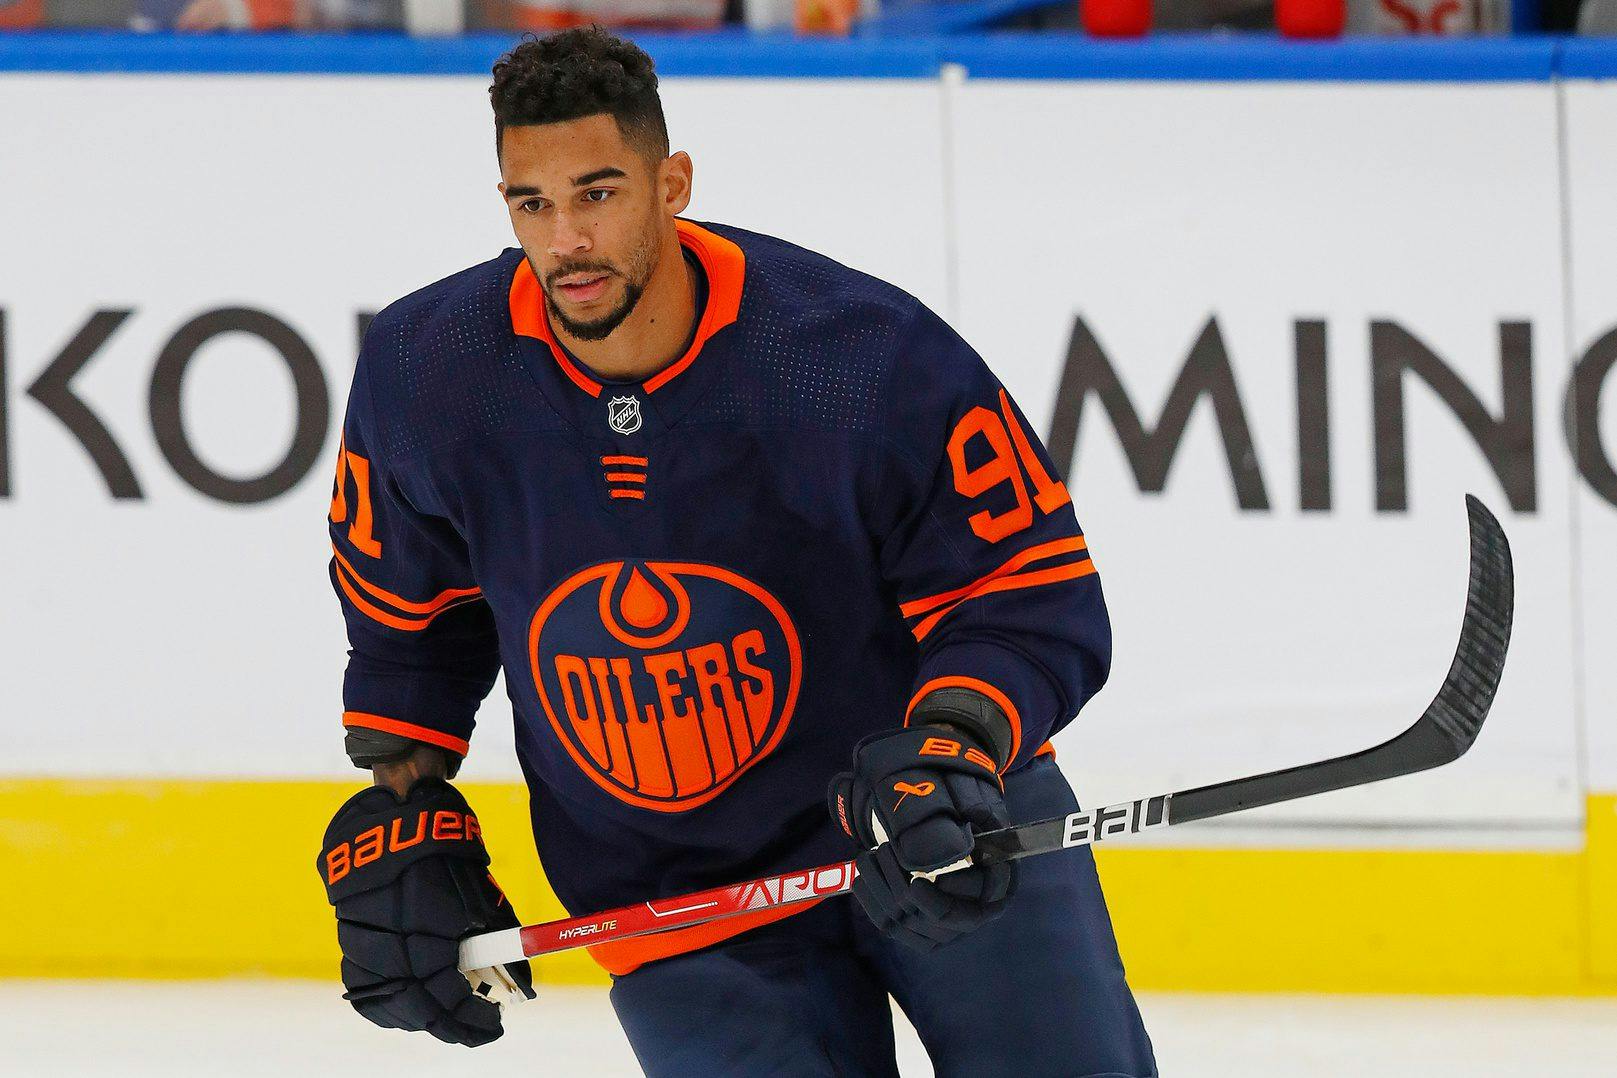 Oilers forward Evander Kane out 3-4 months after wrist cut by skate